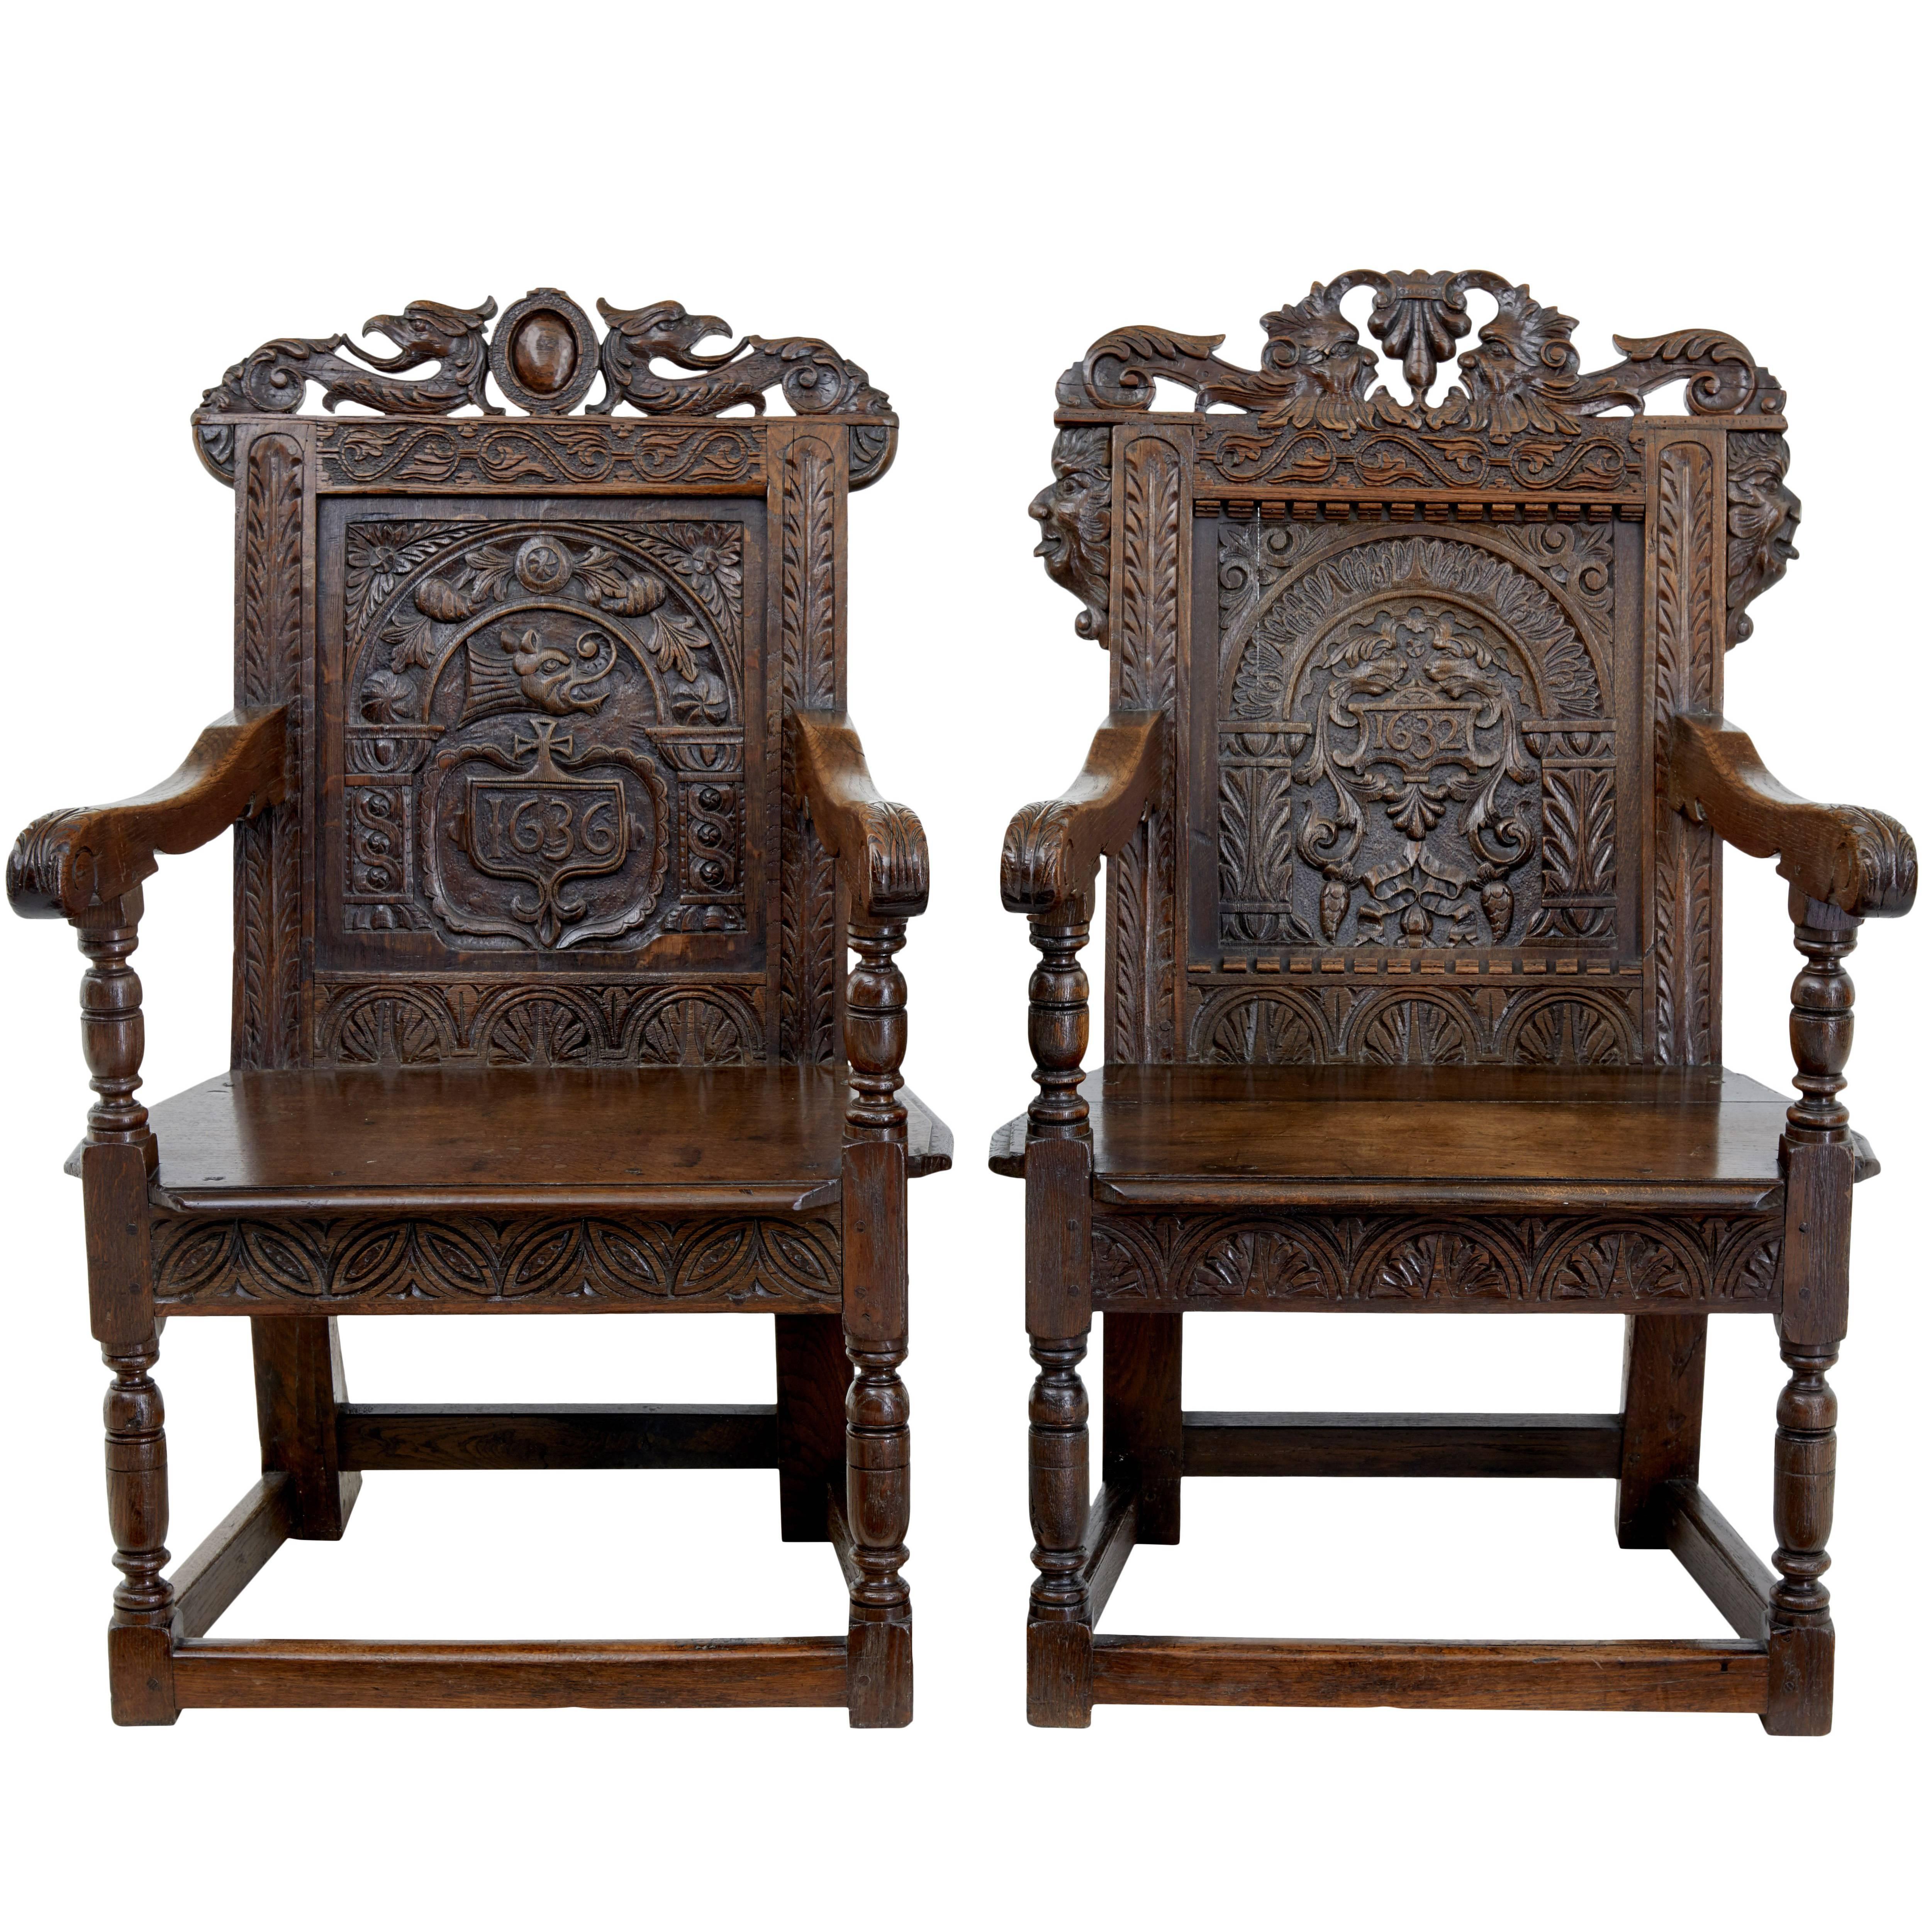 Near Pair of Stunning 19th Century Carved Oak Wainscot Chairs